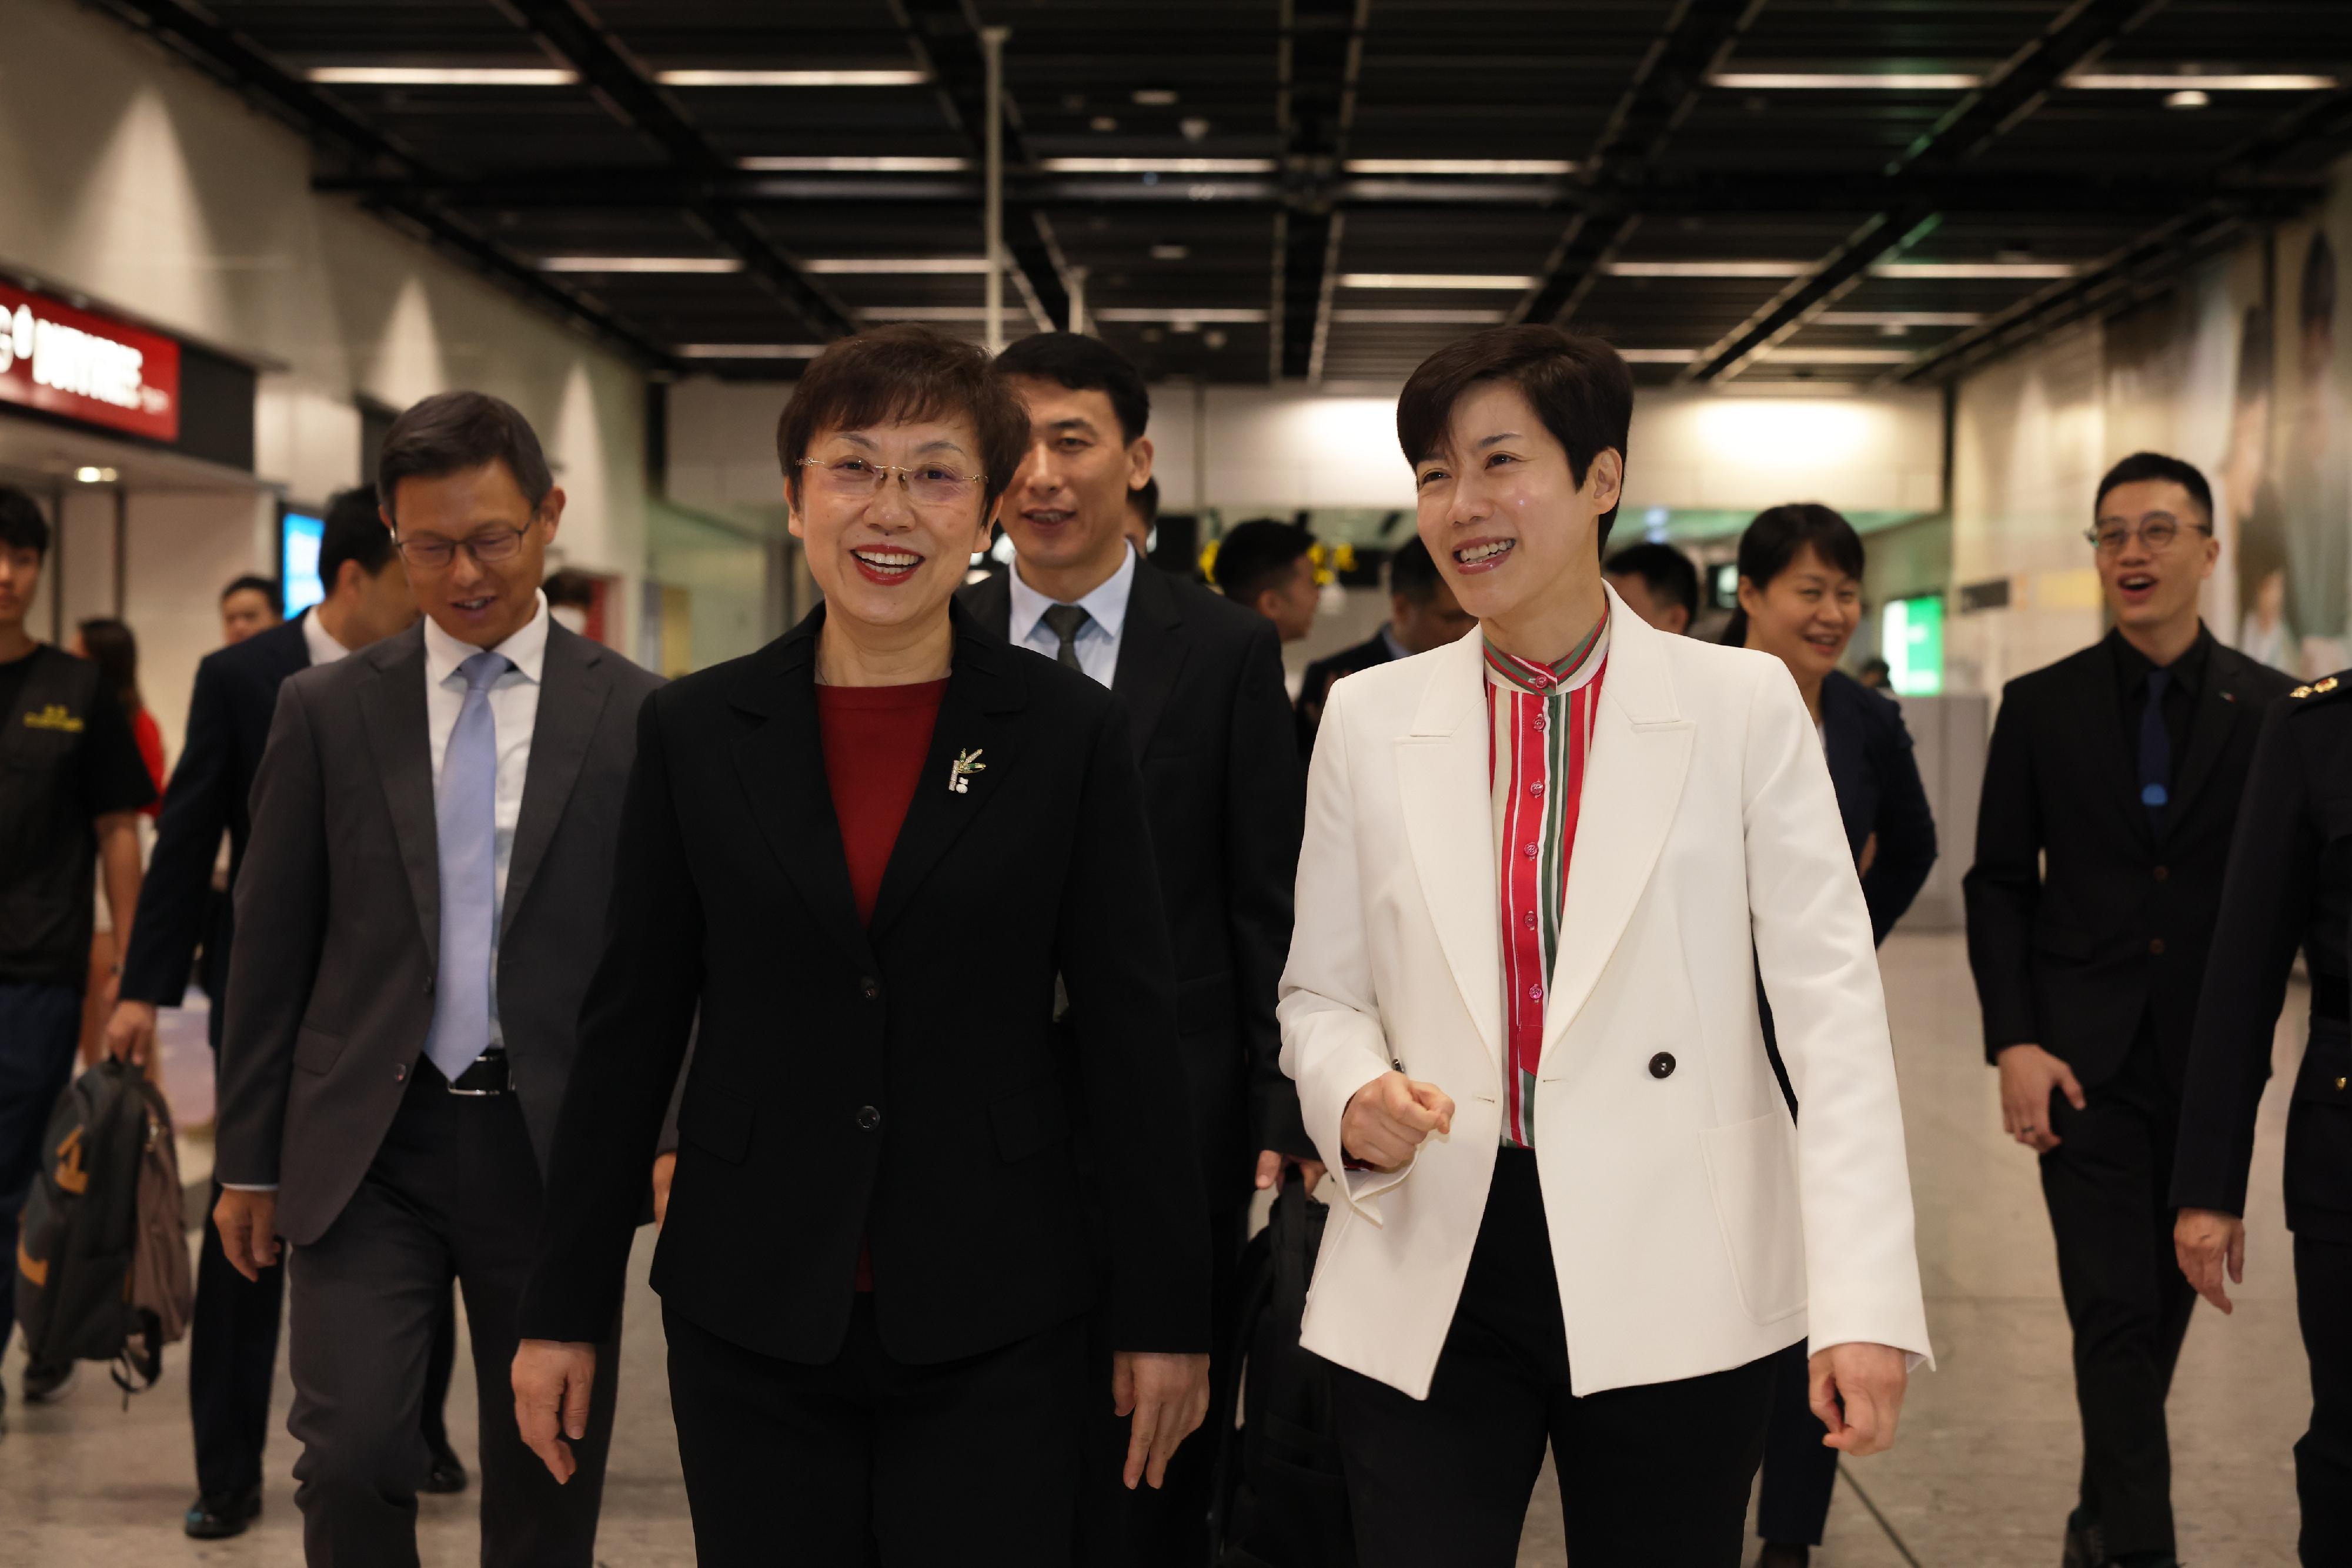 The Commissioner of Customs and Excise, Ms Louise Ho (right), today (November 27) accompanies Vice Minister of General Administration of Customs of the People's Republic of China Ms Lv Weihong (left) to visit the West Kowloon Station of the Guangzhou-Shenzhen-Hong Kong Express Rail Link.
